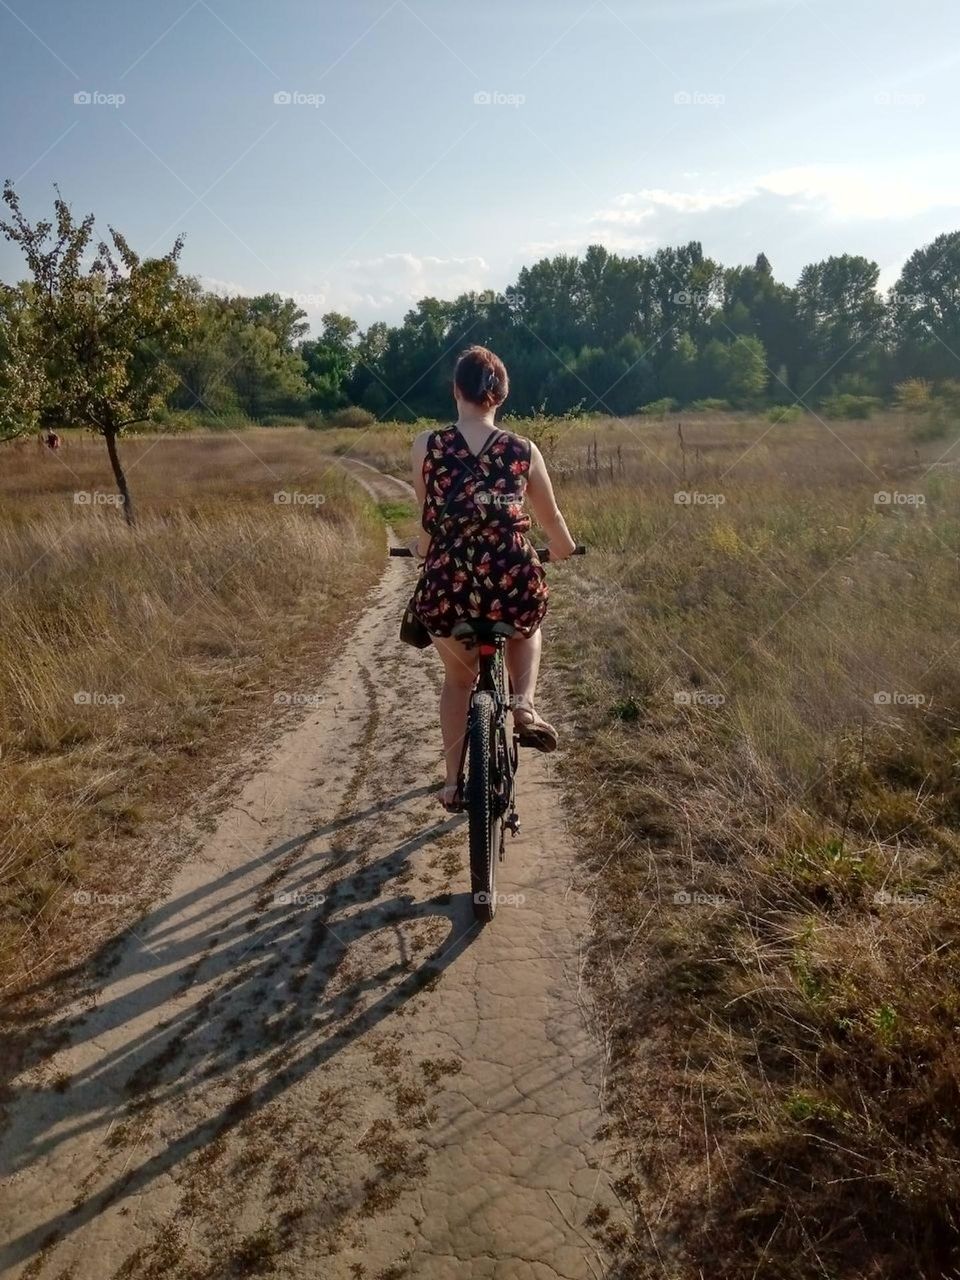 A bicycle ride on a field on a sunny summer day